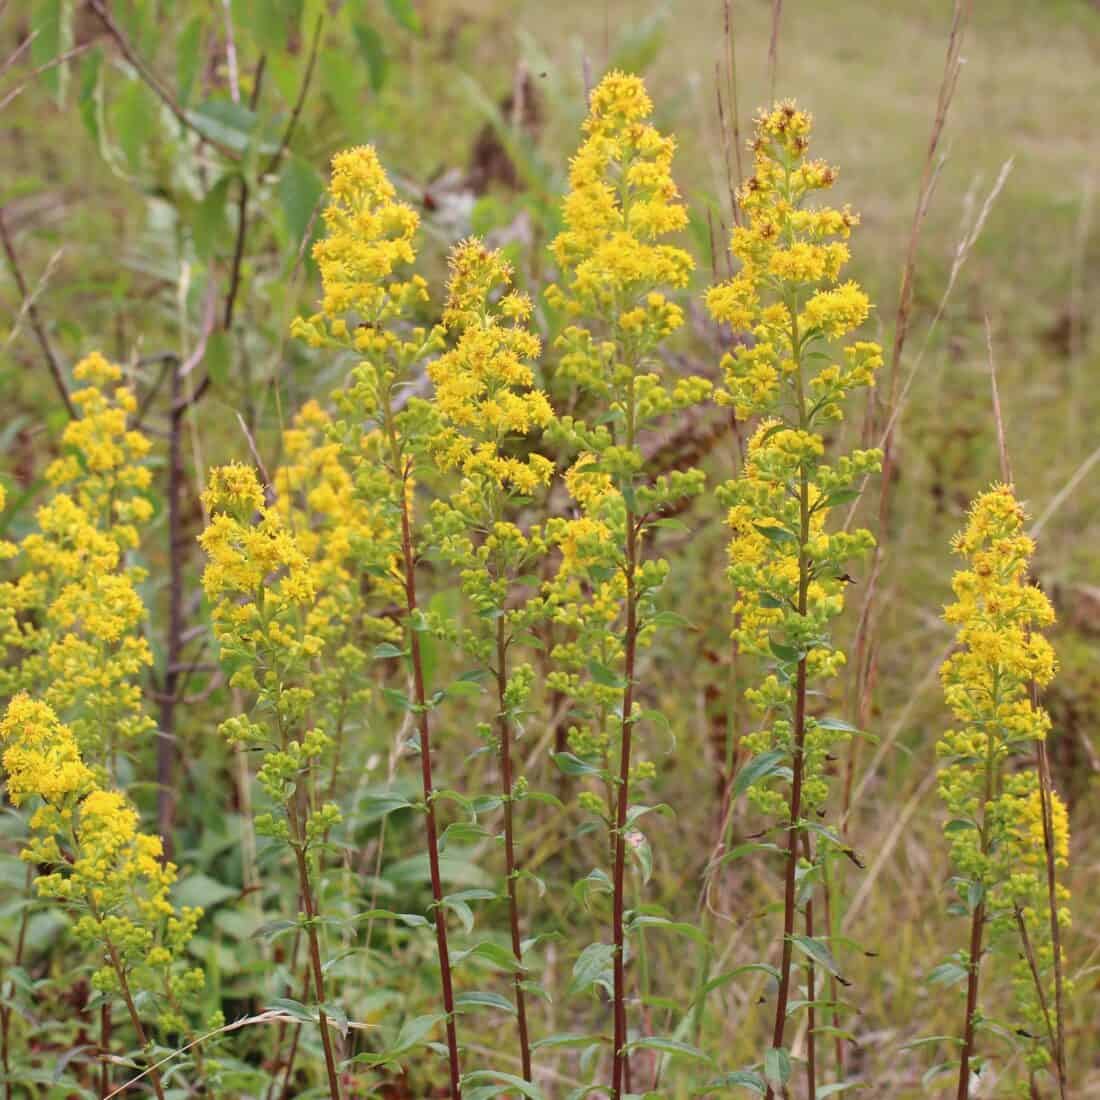 A cluster of yellow wildflowers - Downy Goldenrod - solidago puberula - standing tall amidst green foliage.